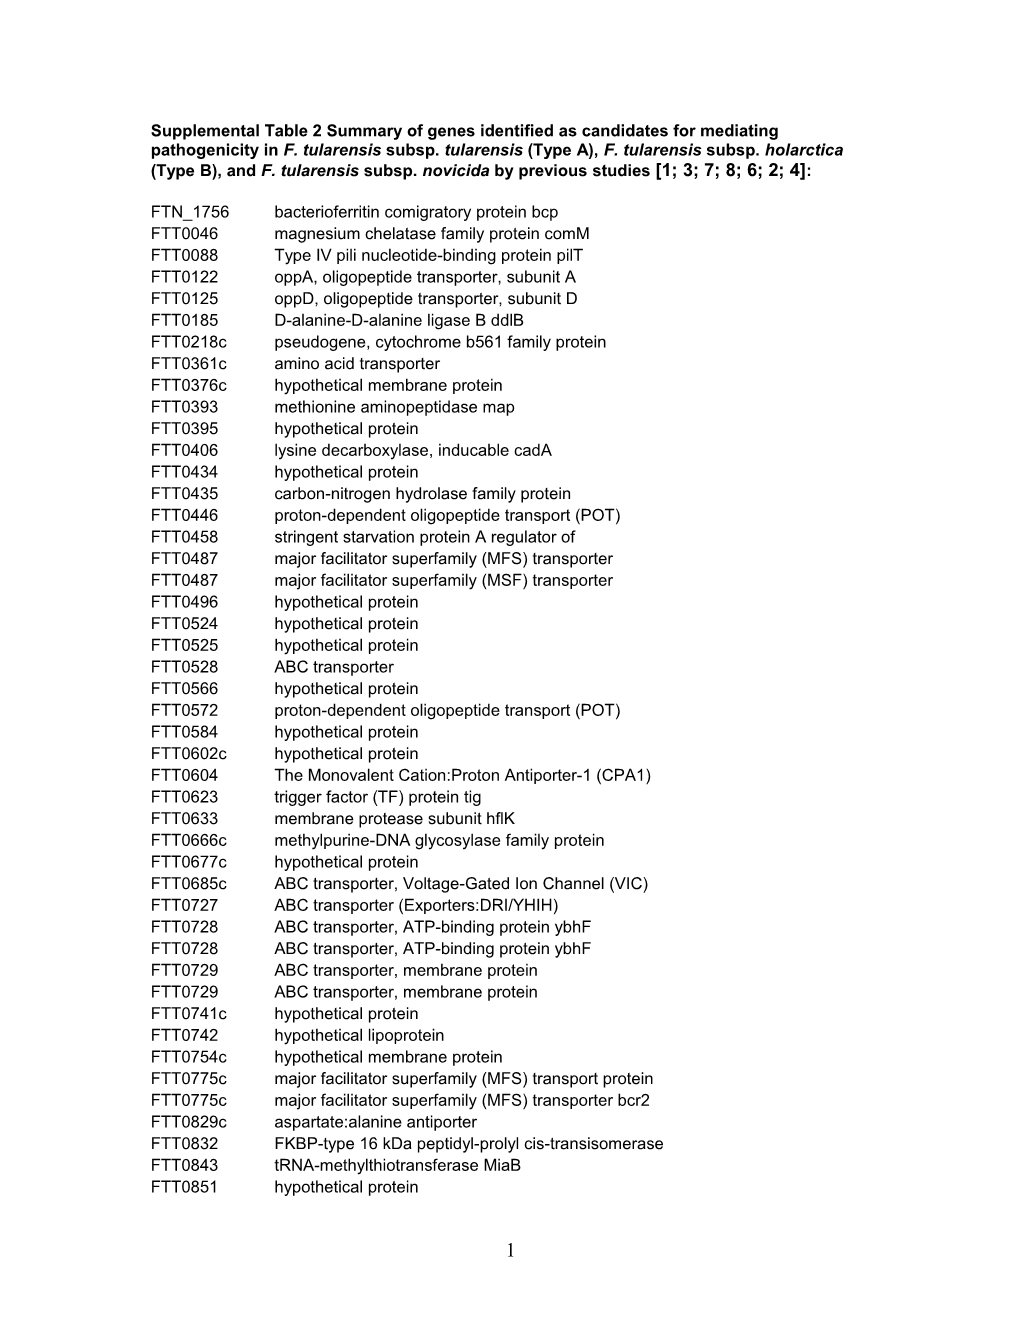 Supplemental Table 2 Summary of Genes Identified As Candidates for Mediating Pathogenicity in F